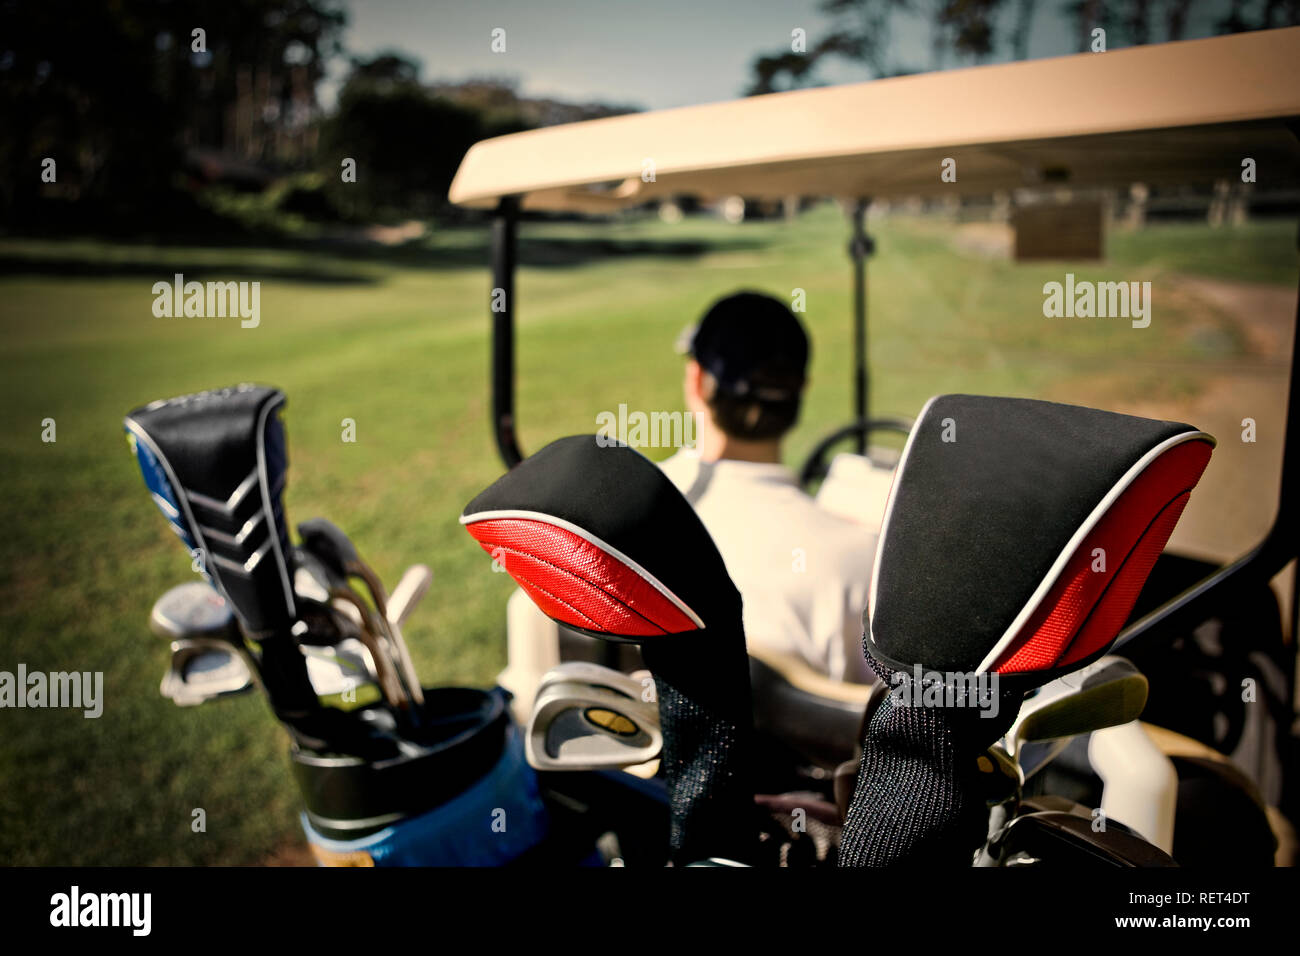 Golf clubs inside a golf bag in the back of a golf cart at a golf course. Stock Photo